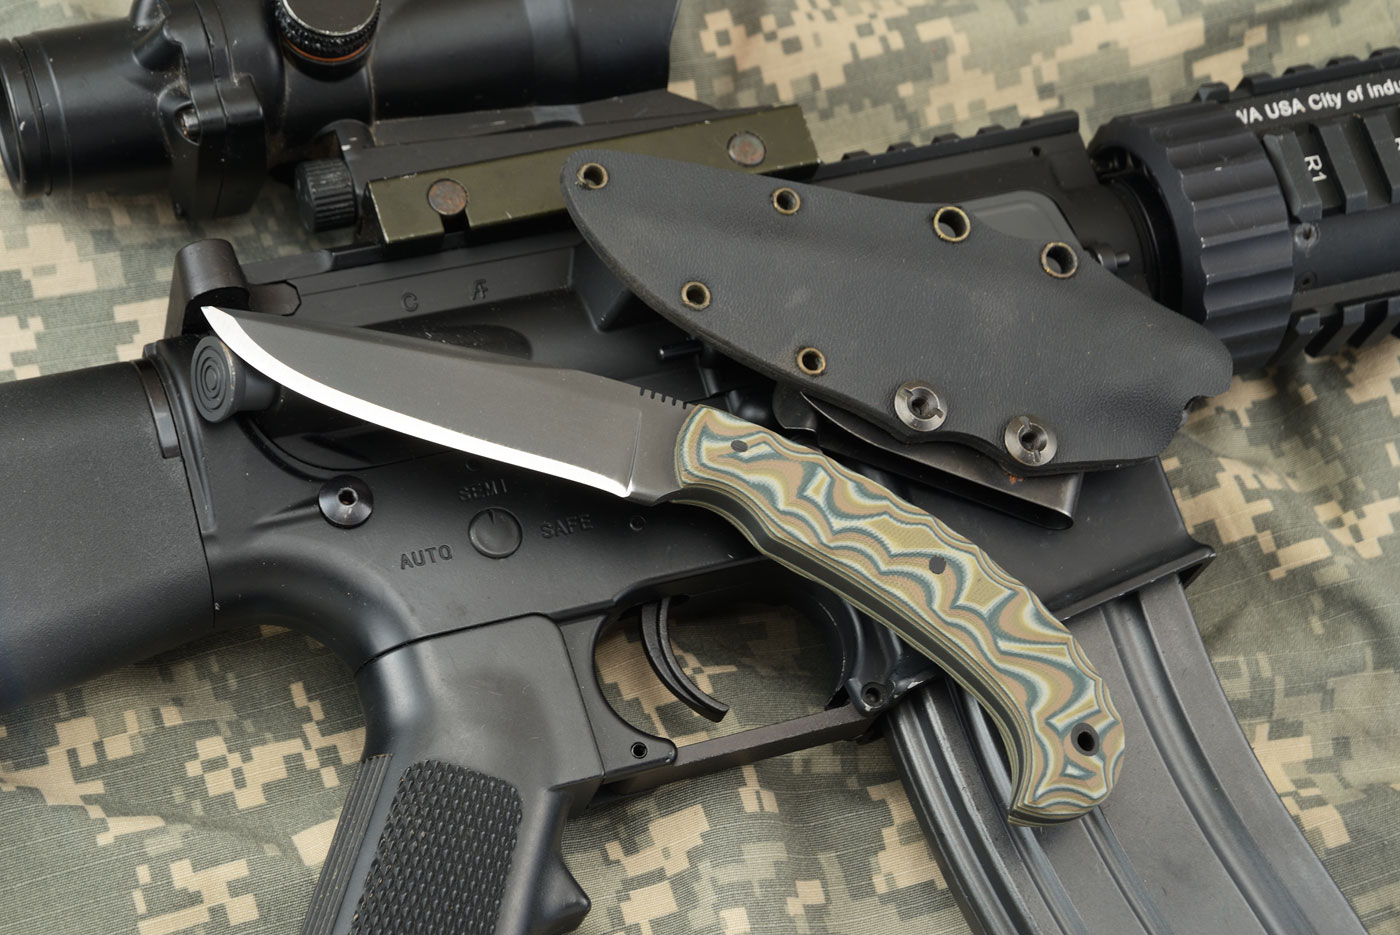 Contingency with Sculpted Multicam G10 (IWB Sheath)